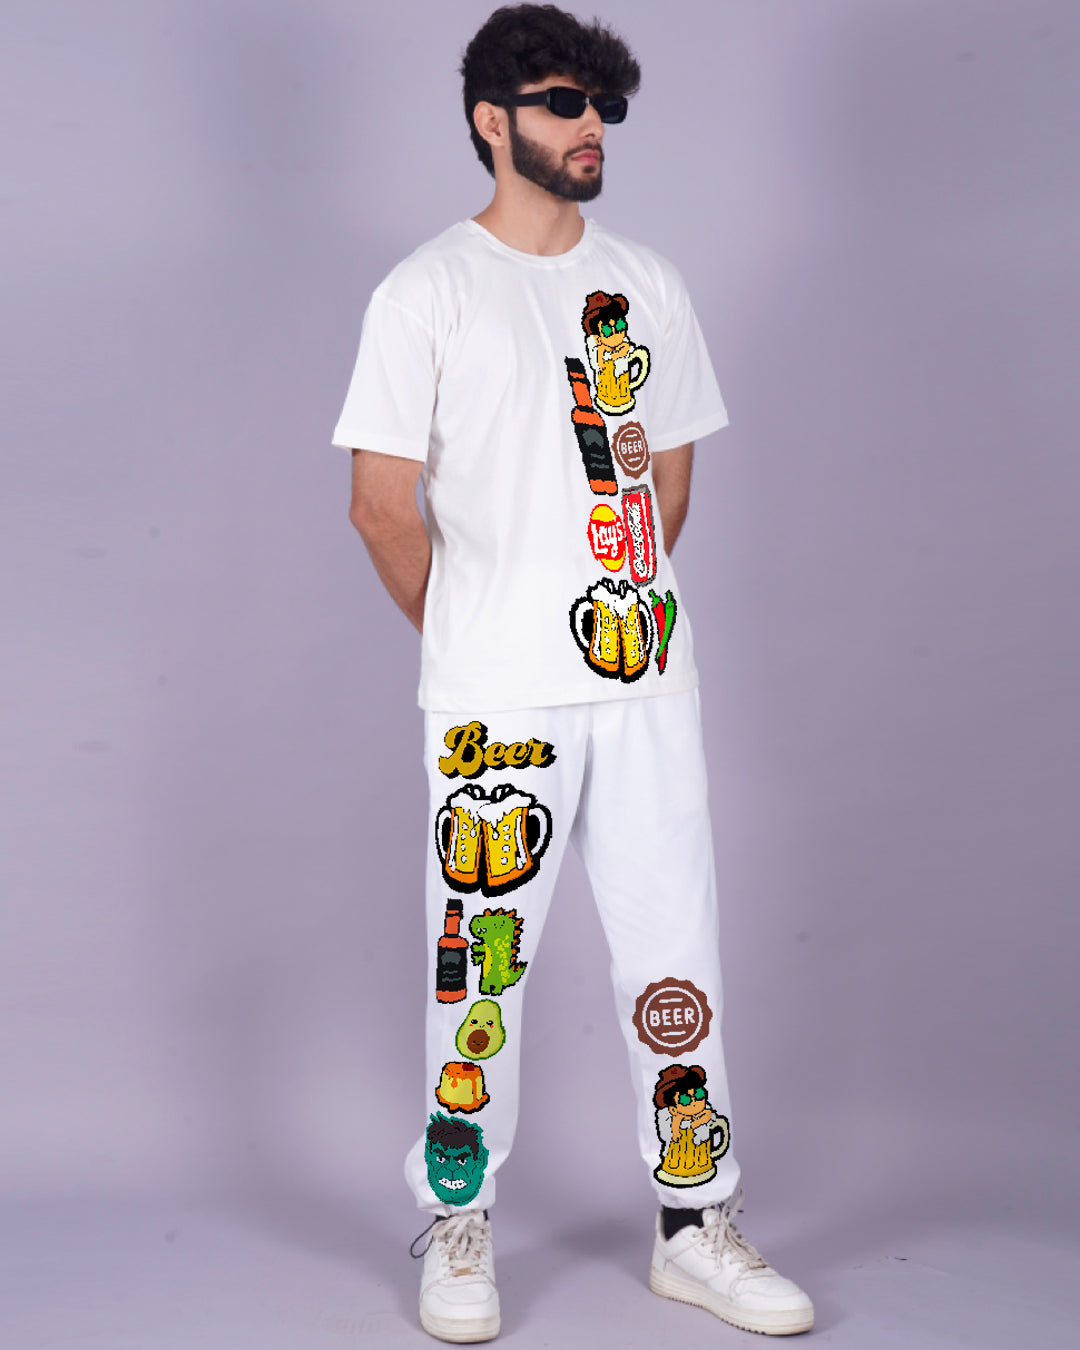 Men's Two Piece Beerfood Oversized Co-ord Set in White